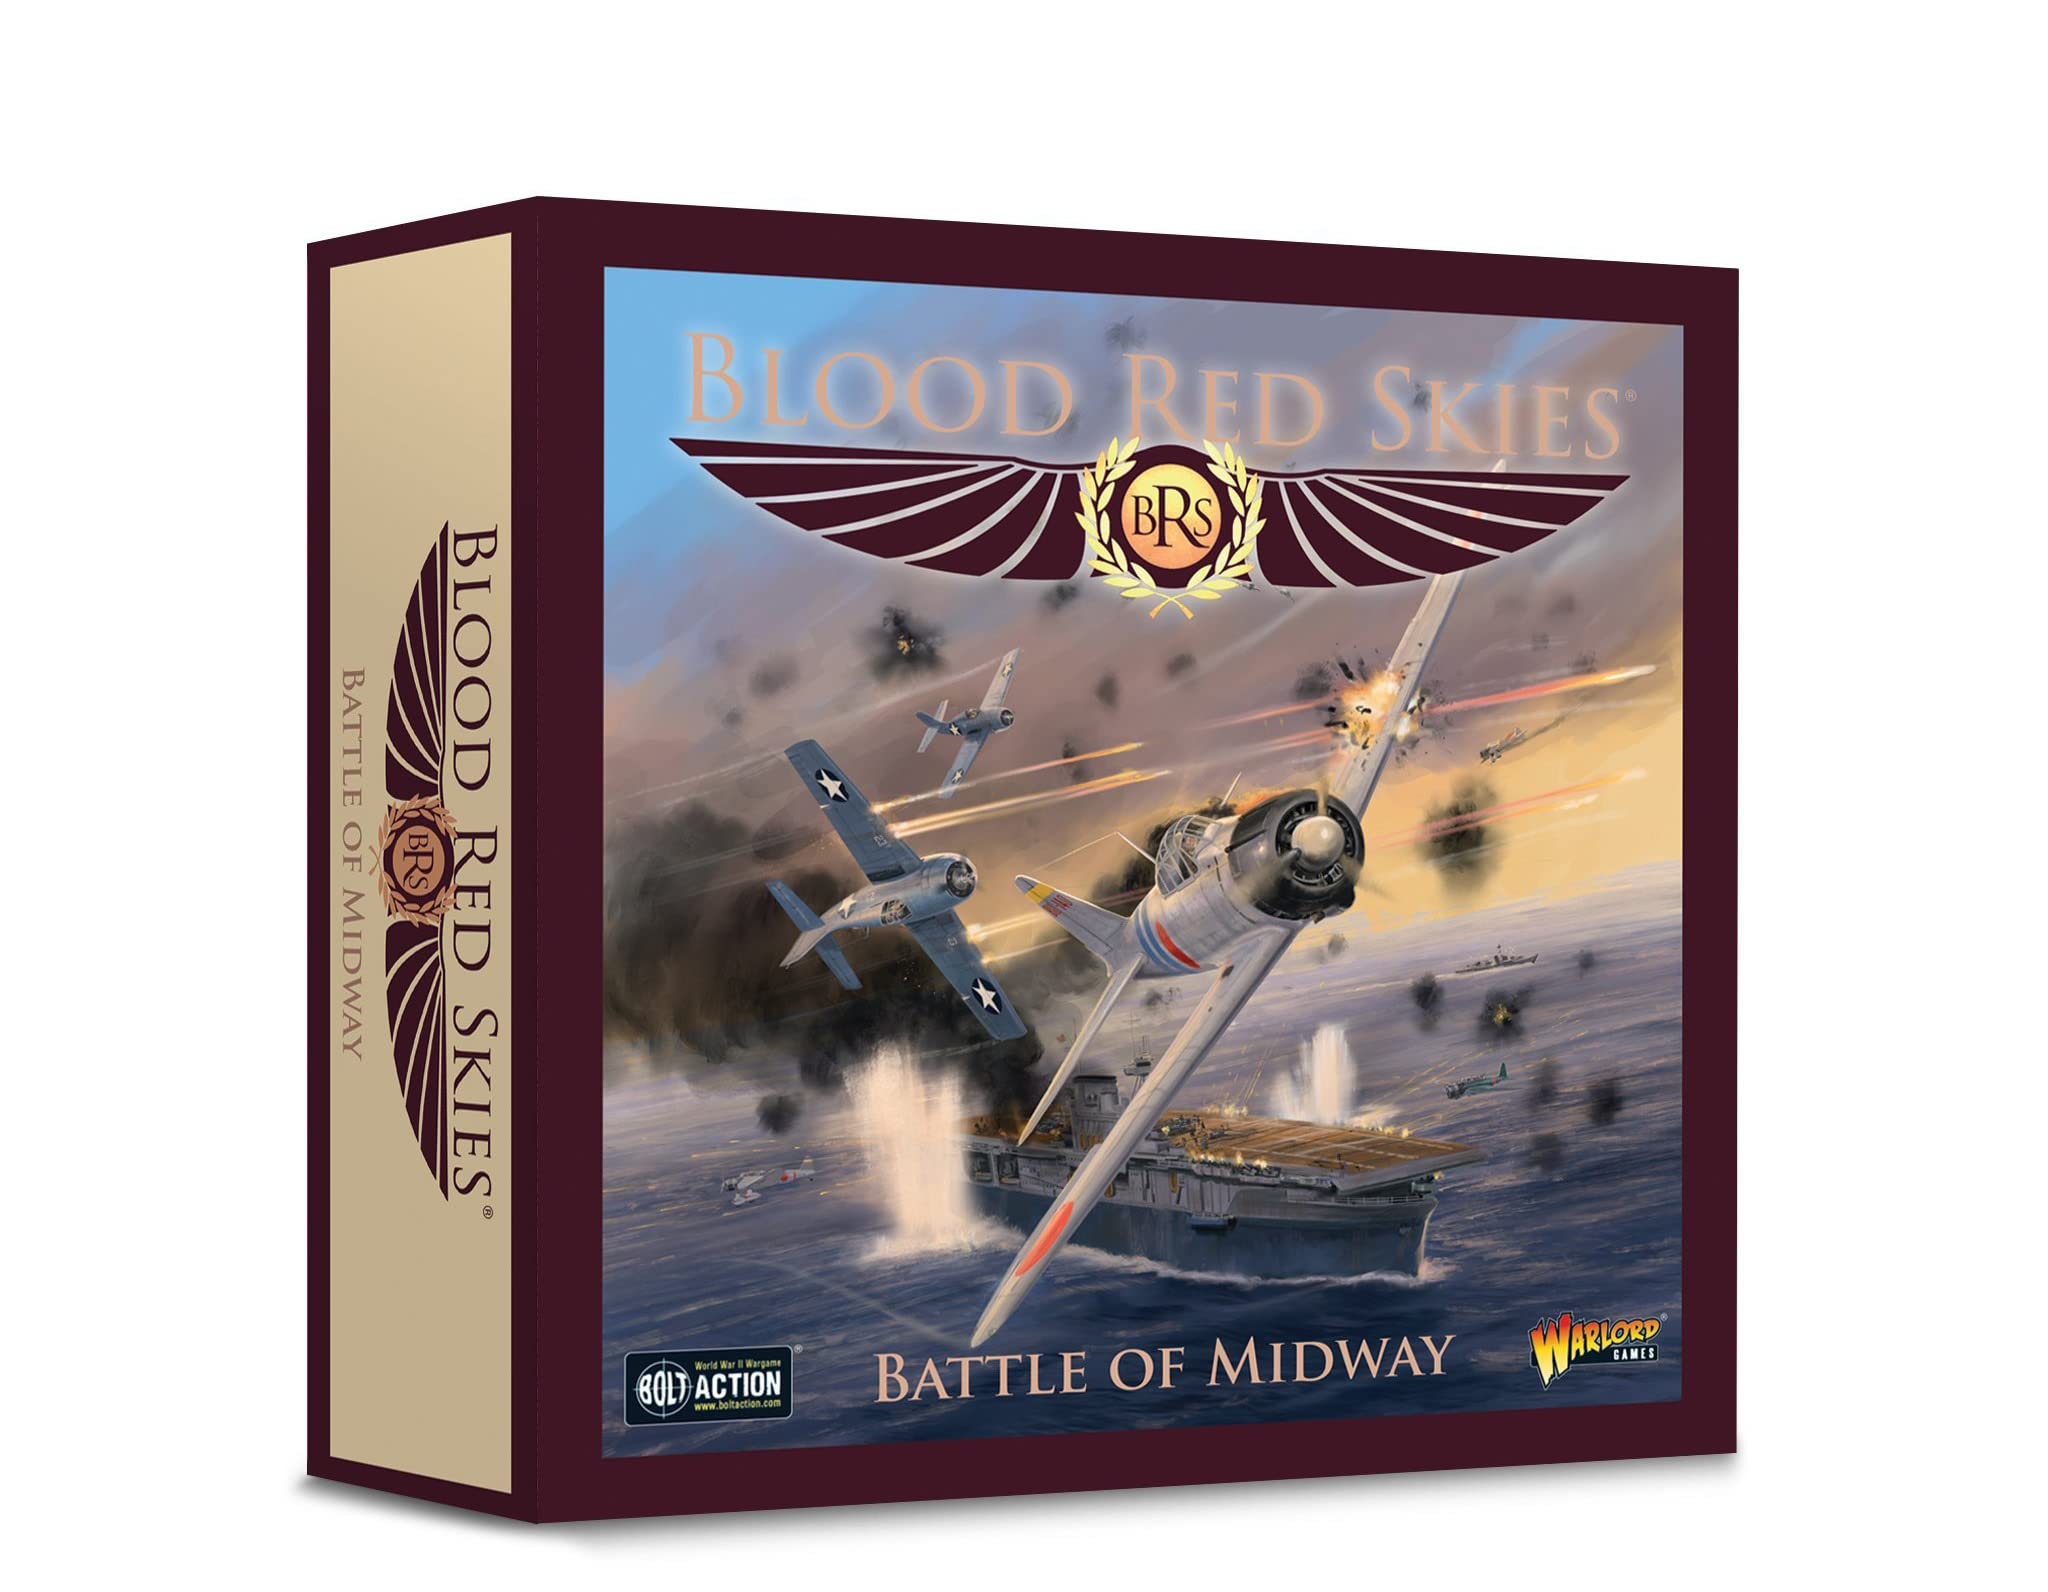 Blood Red Skies Battle of Midway